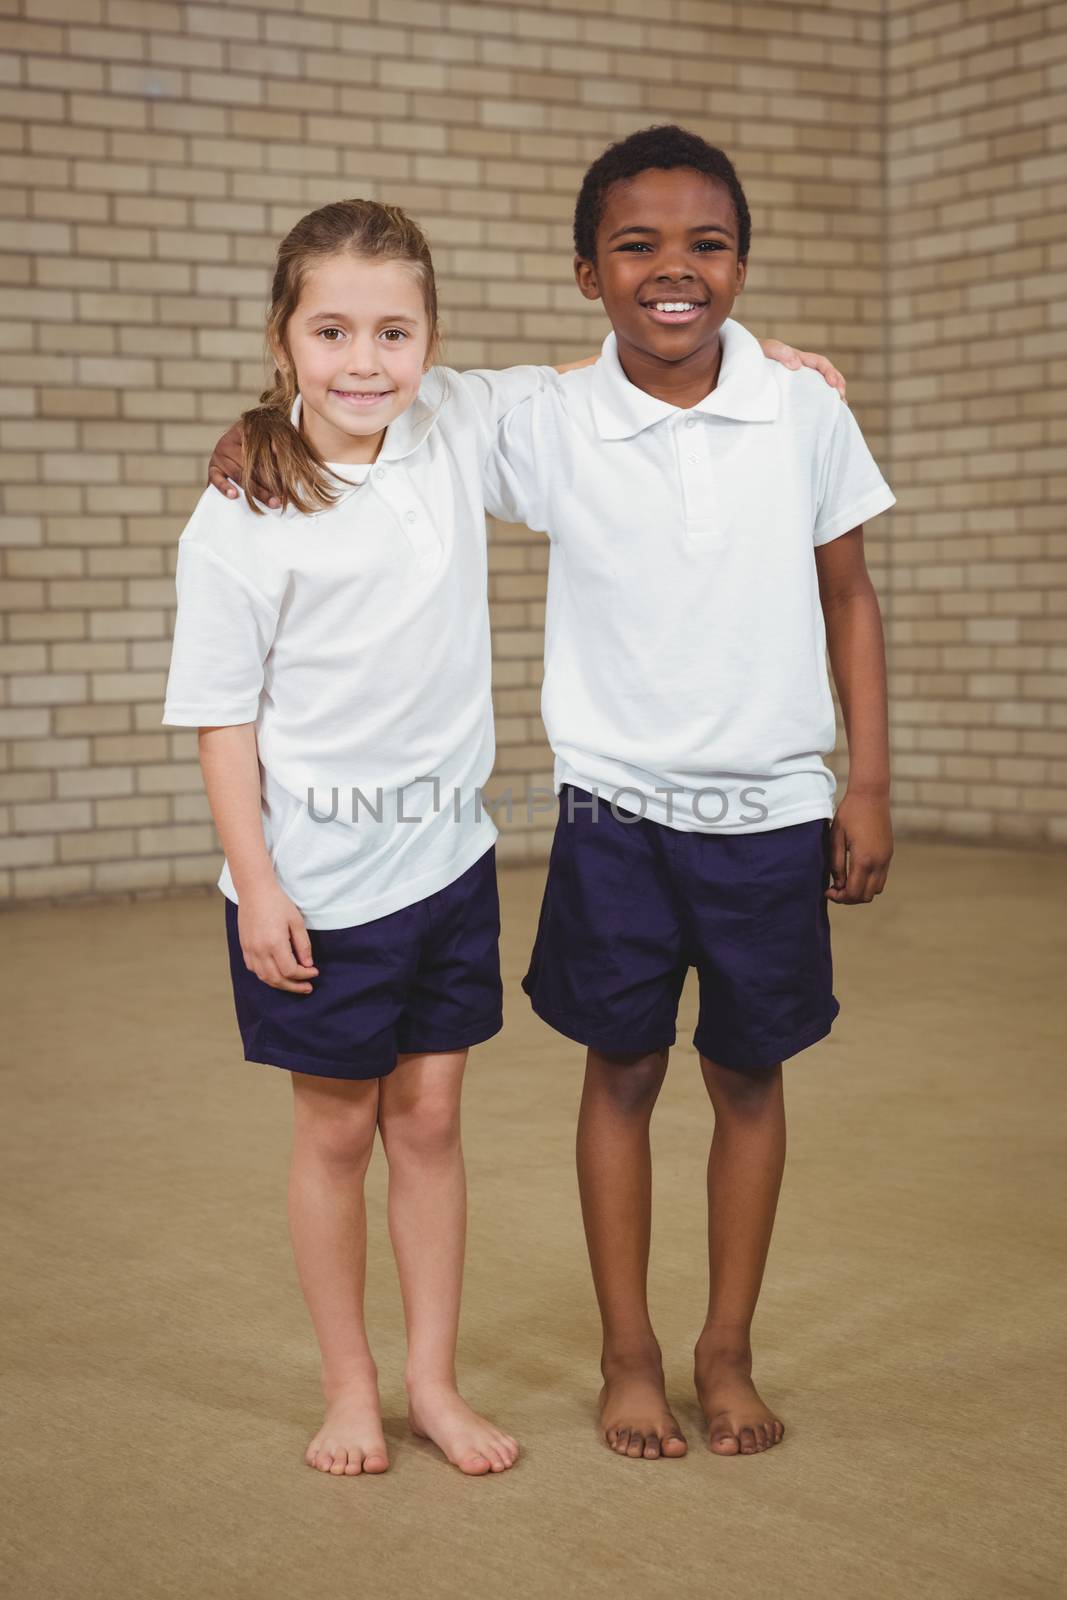 Pupils smiling with arms around each other at the elementary school